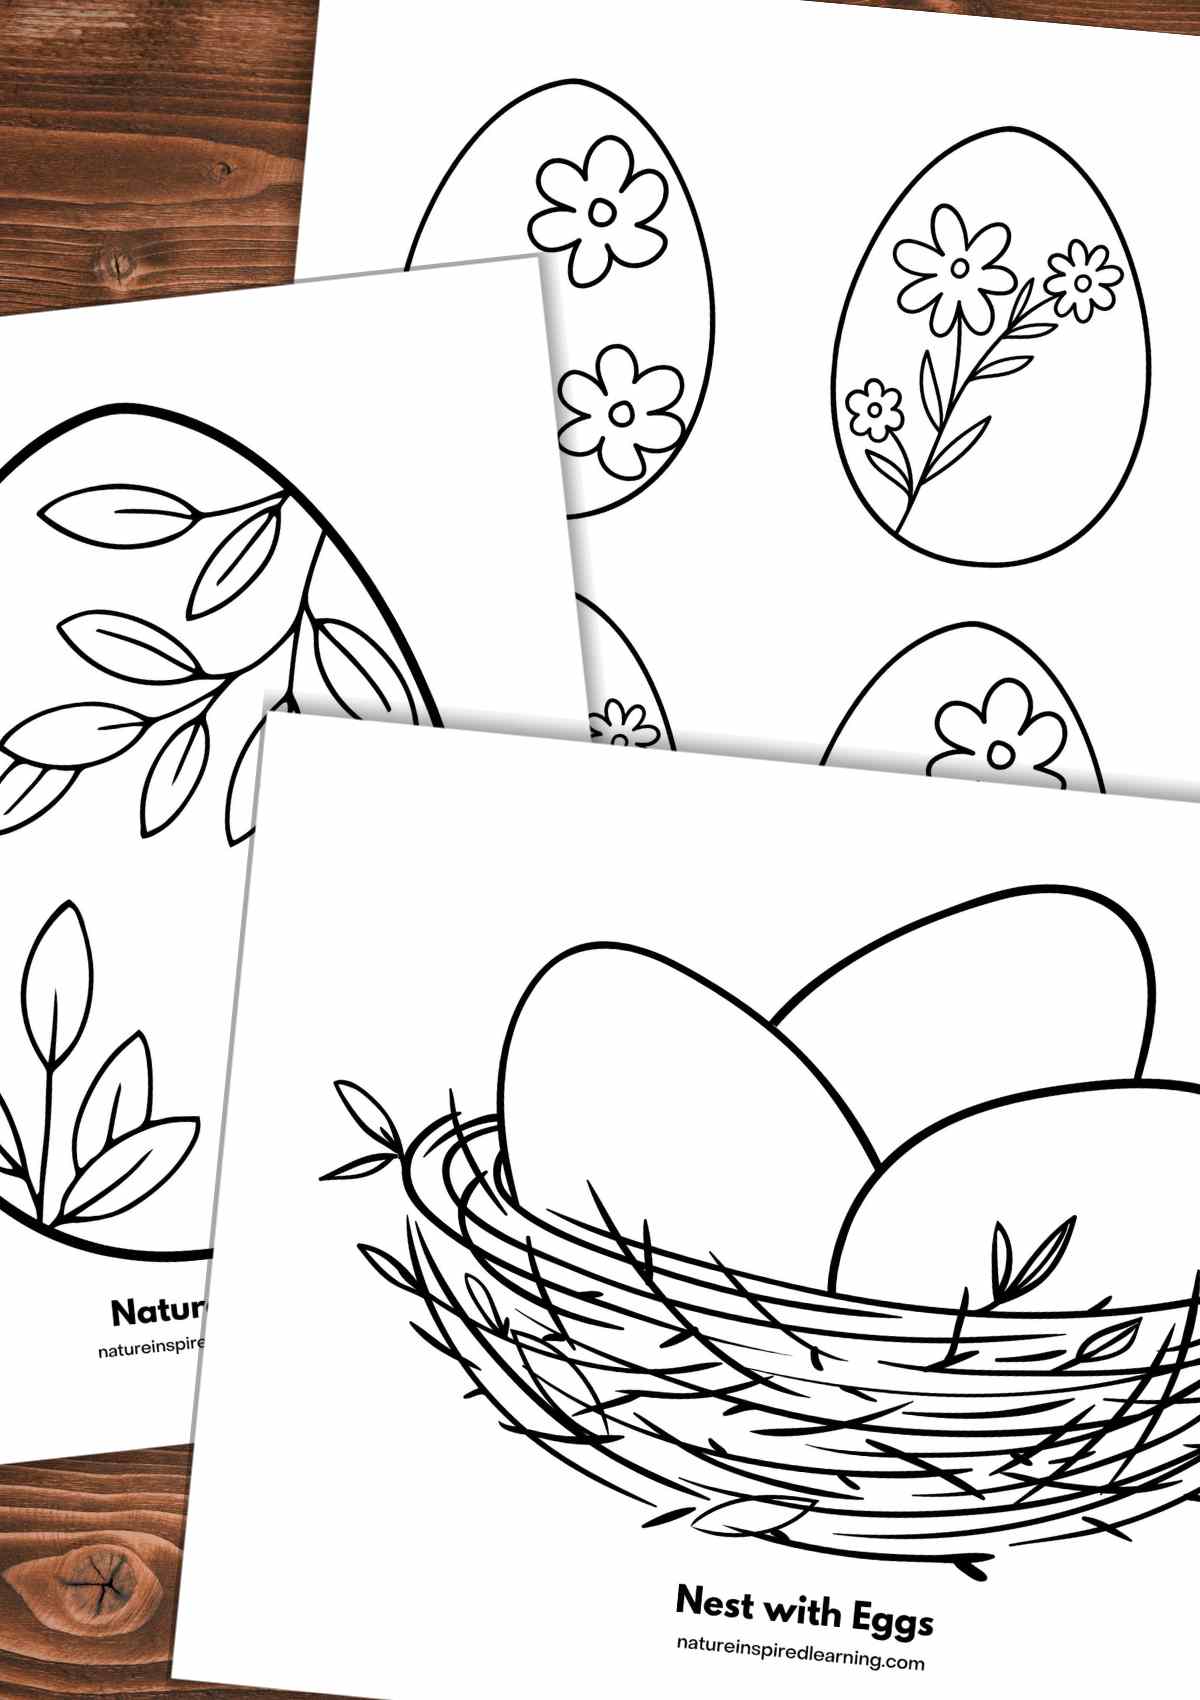 three black and white sheets with different egg designs including a large egg with leaf designs, eggs with flowers, and a nest with three eggs overlapping each other on a wooden background.